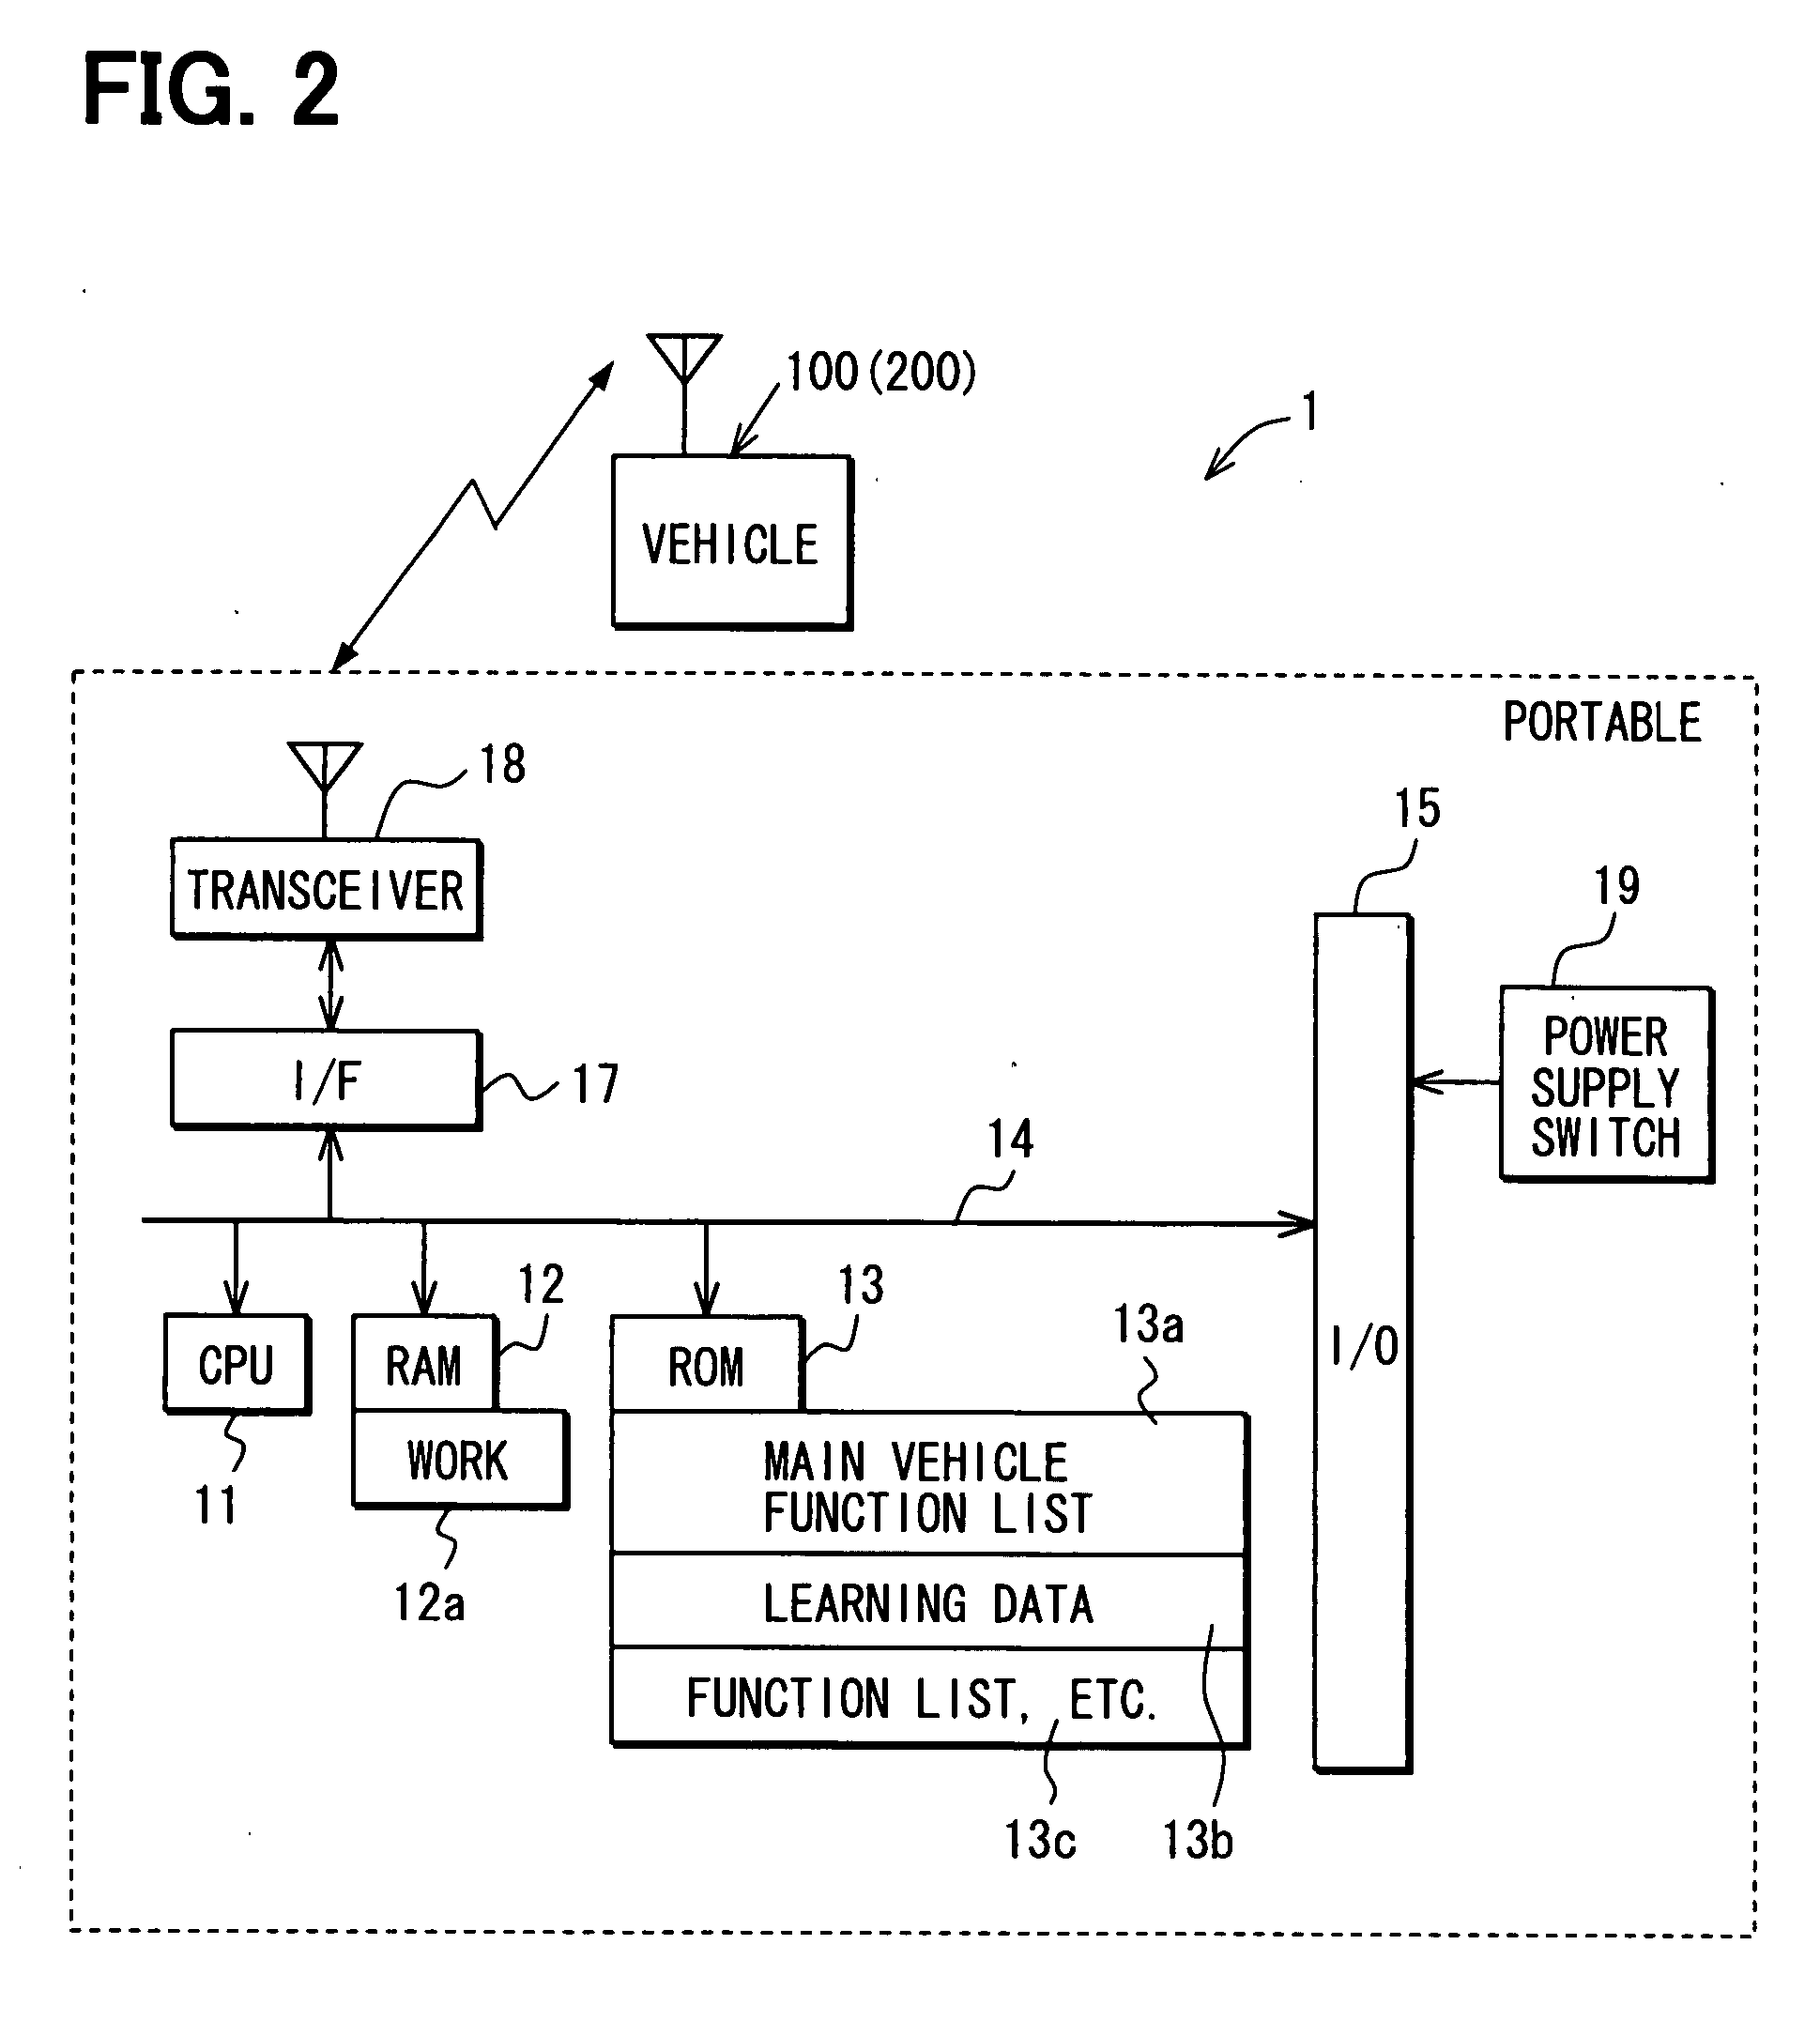 User assistance system for vehicle